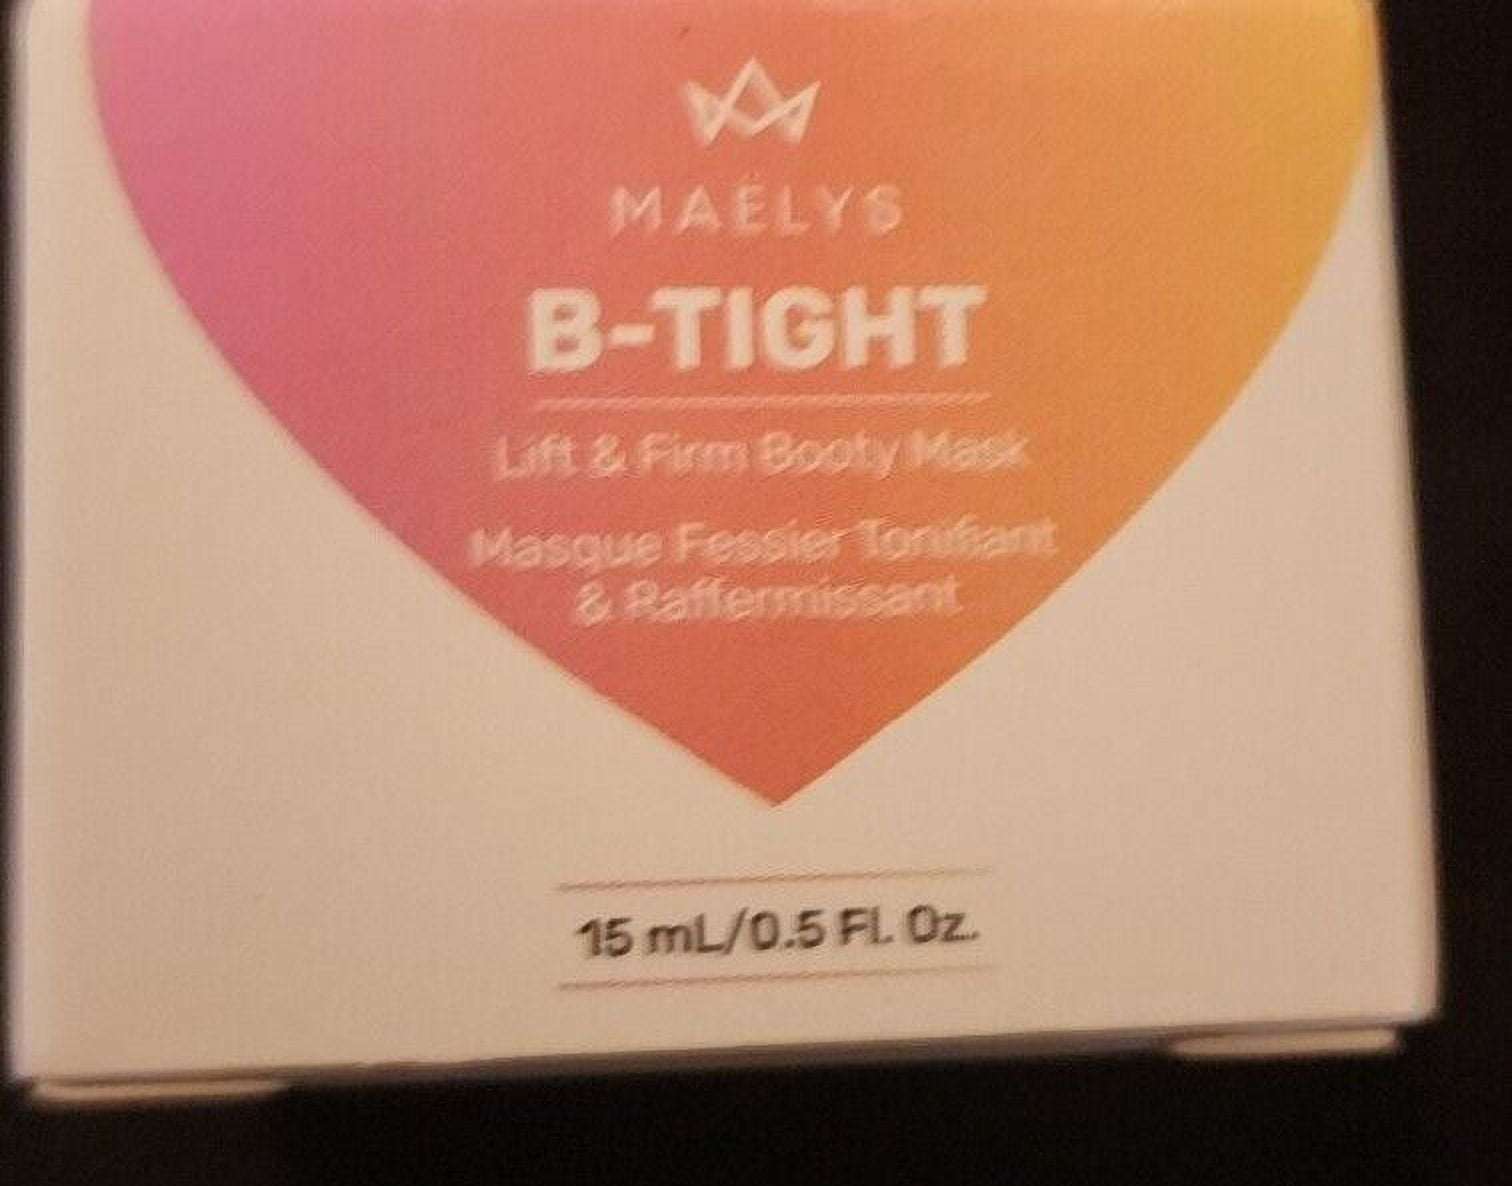 Maelys B-Tight Lift and Firm Booty Mask 15mL 0.5oz TRAVEL Mini SIZE New 